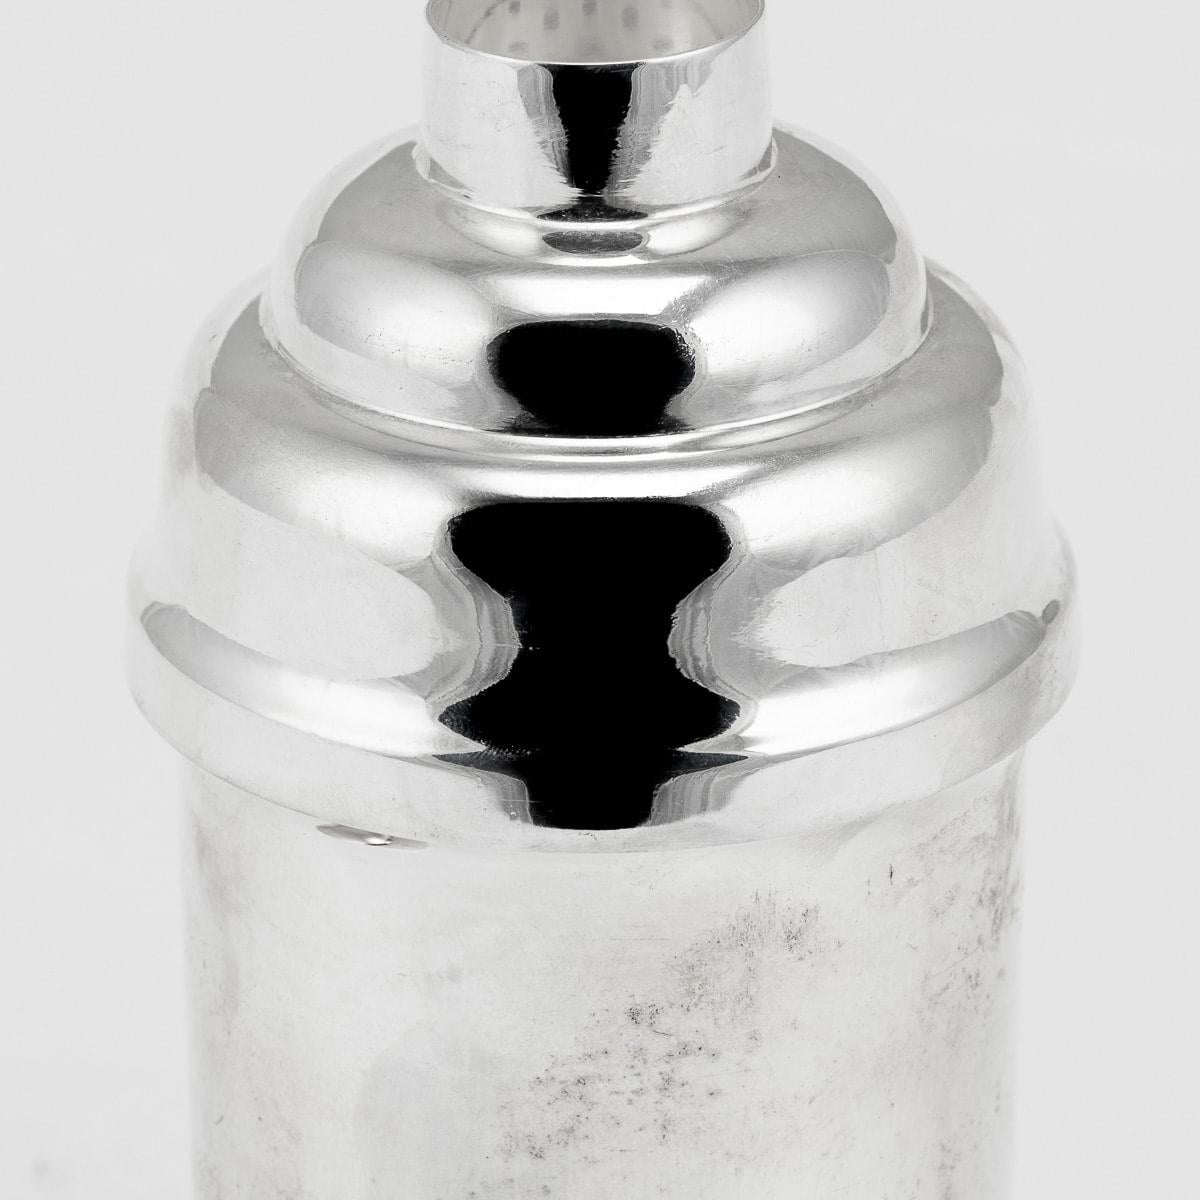 20th Century Silver Plated Art Deco Cocktail Shaker, France c.1950 For Sale 2